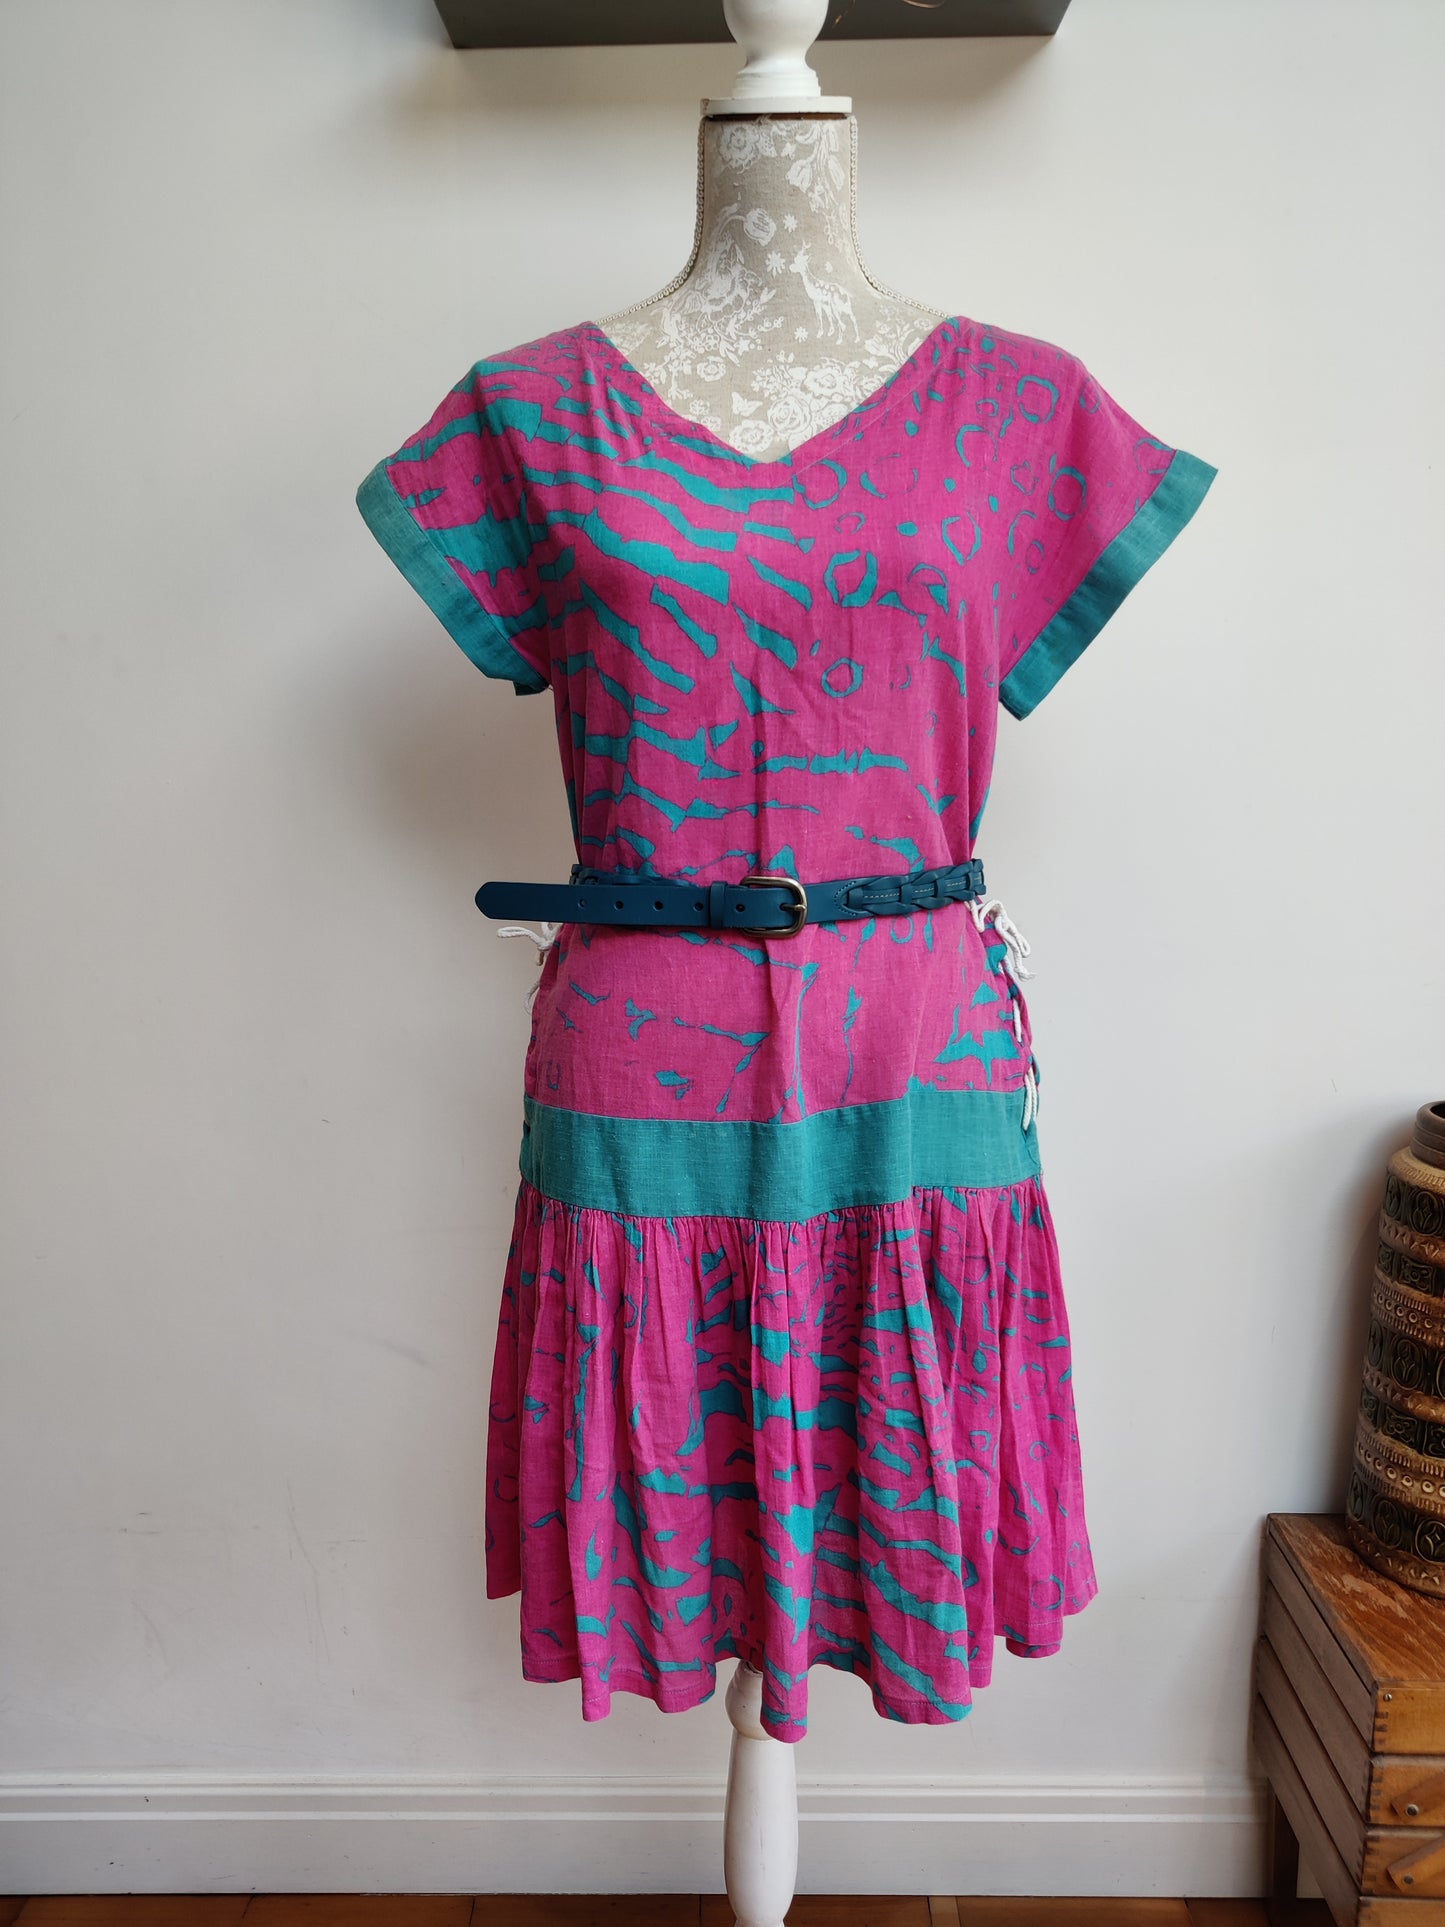 v neck 80s dress in pink and blue